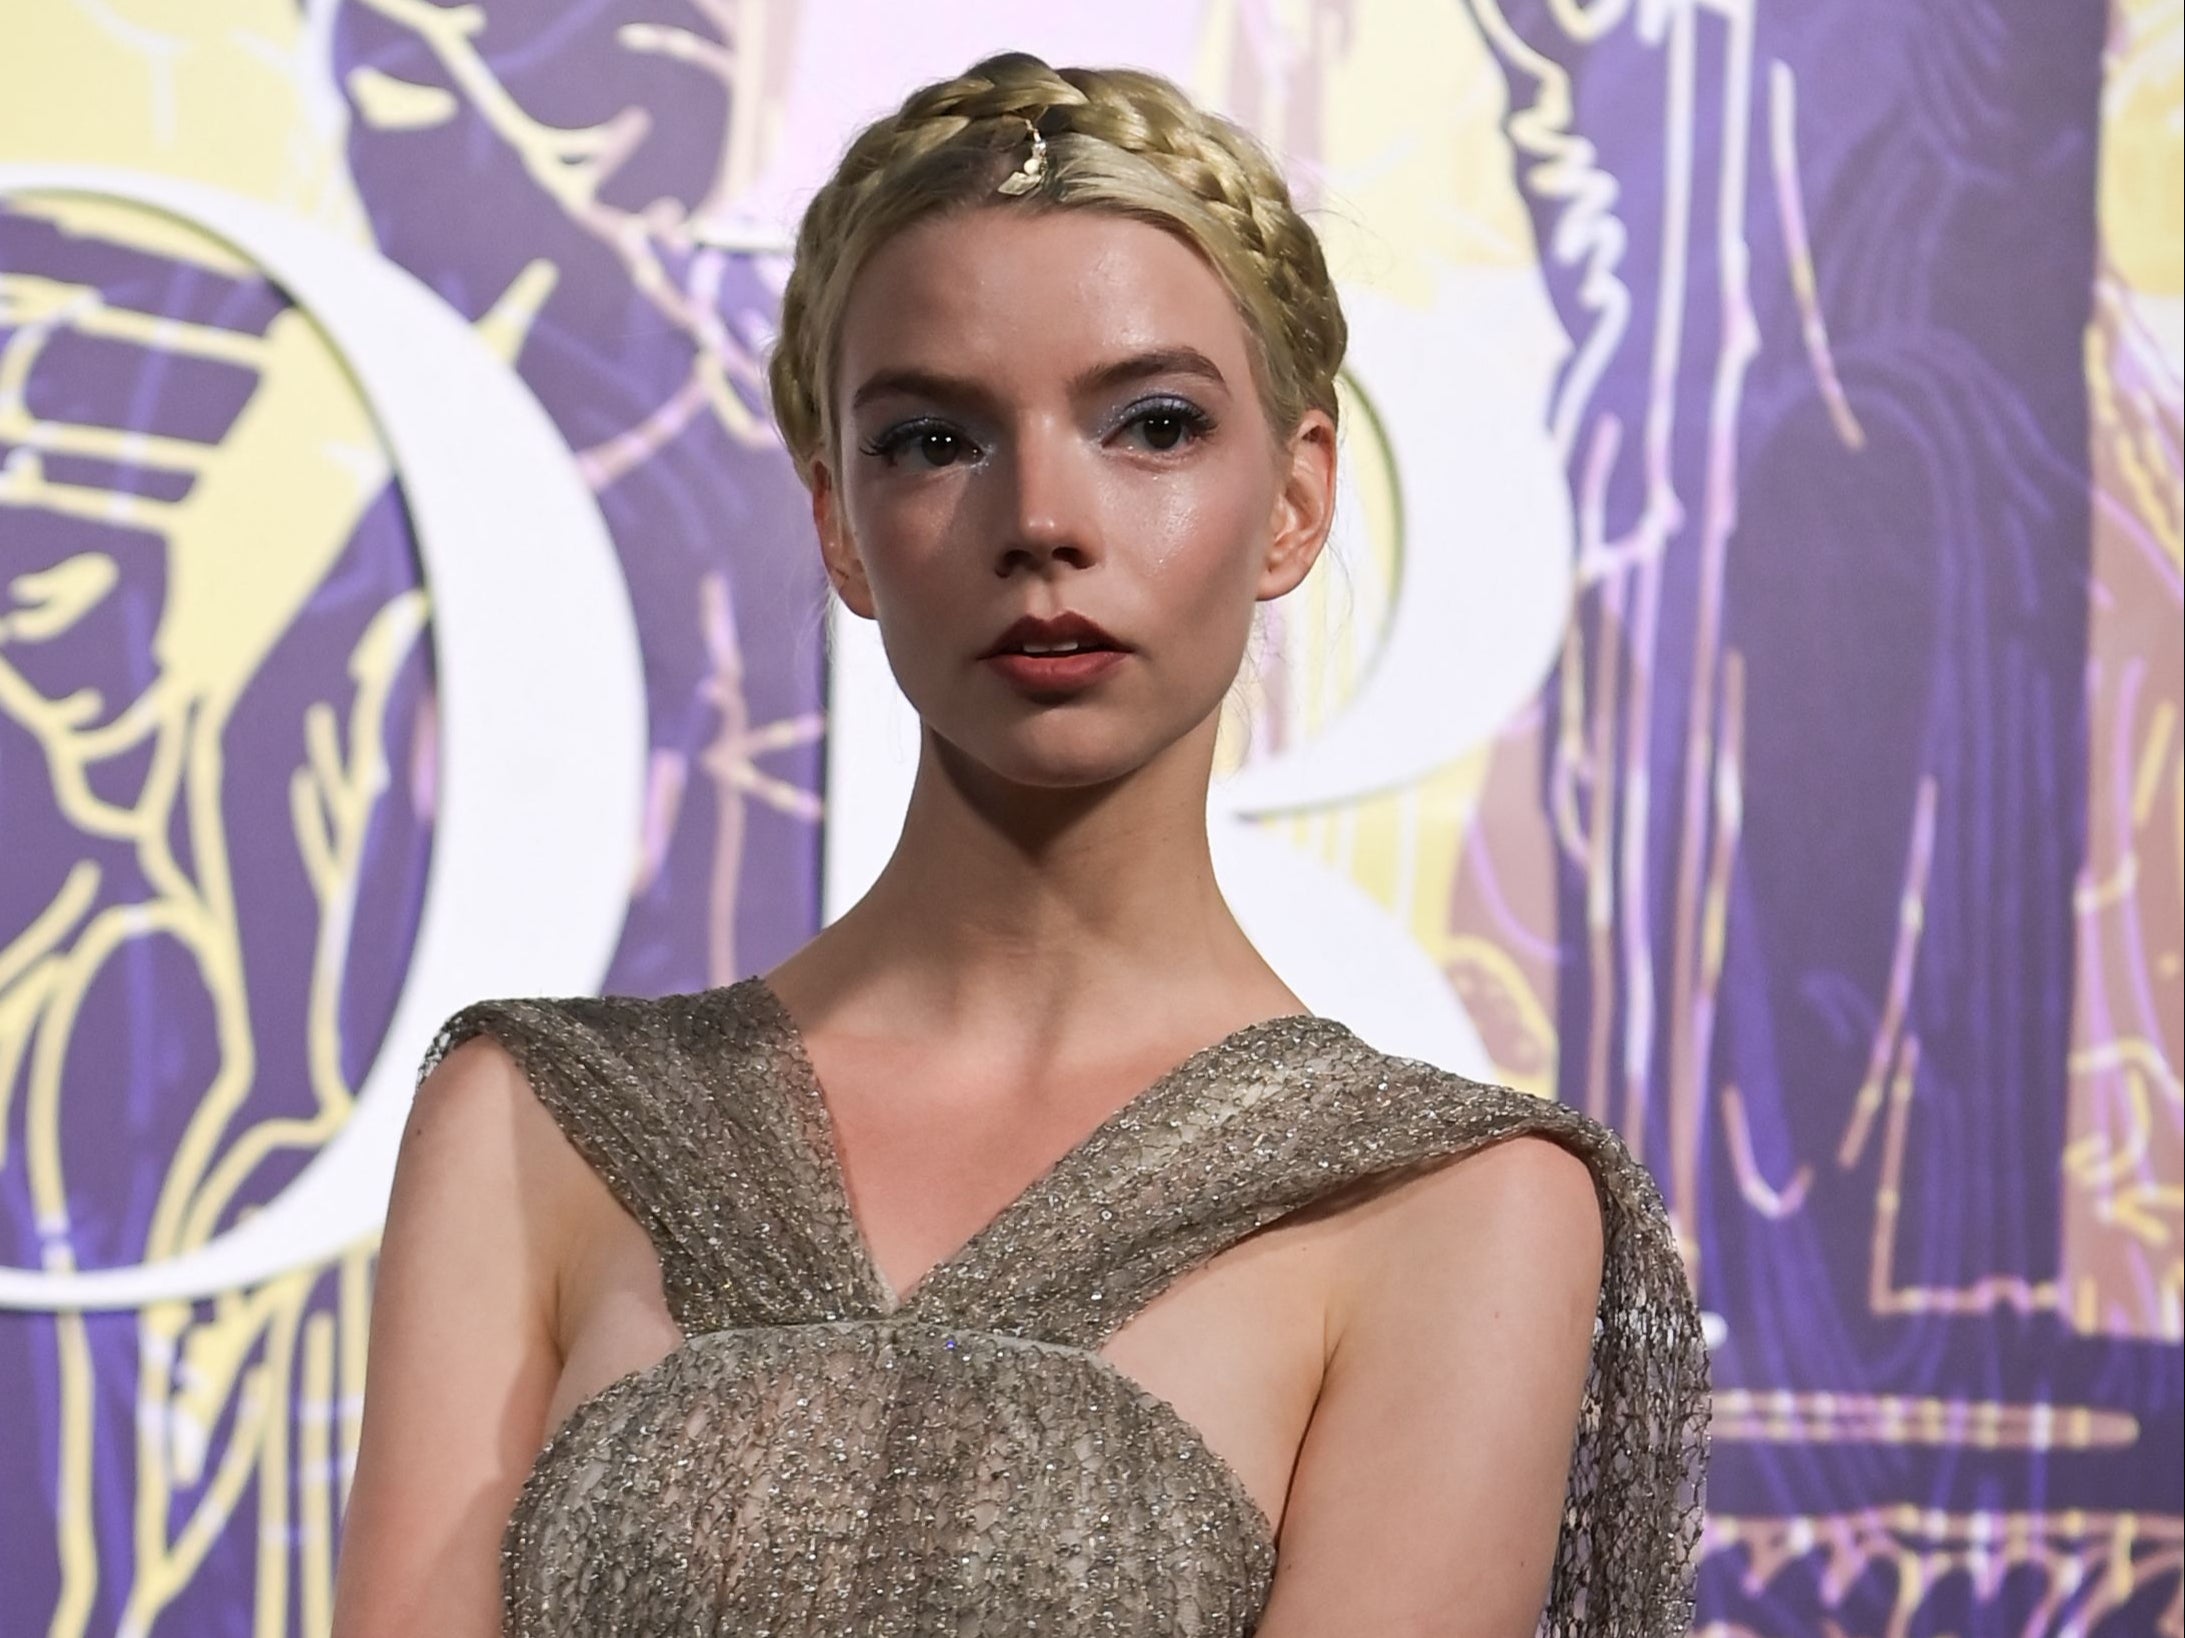 Anya Taylor-Joy at a Dior fashion show in Athens, Greece, on 17 June 2021